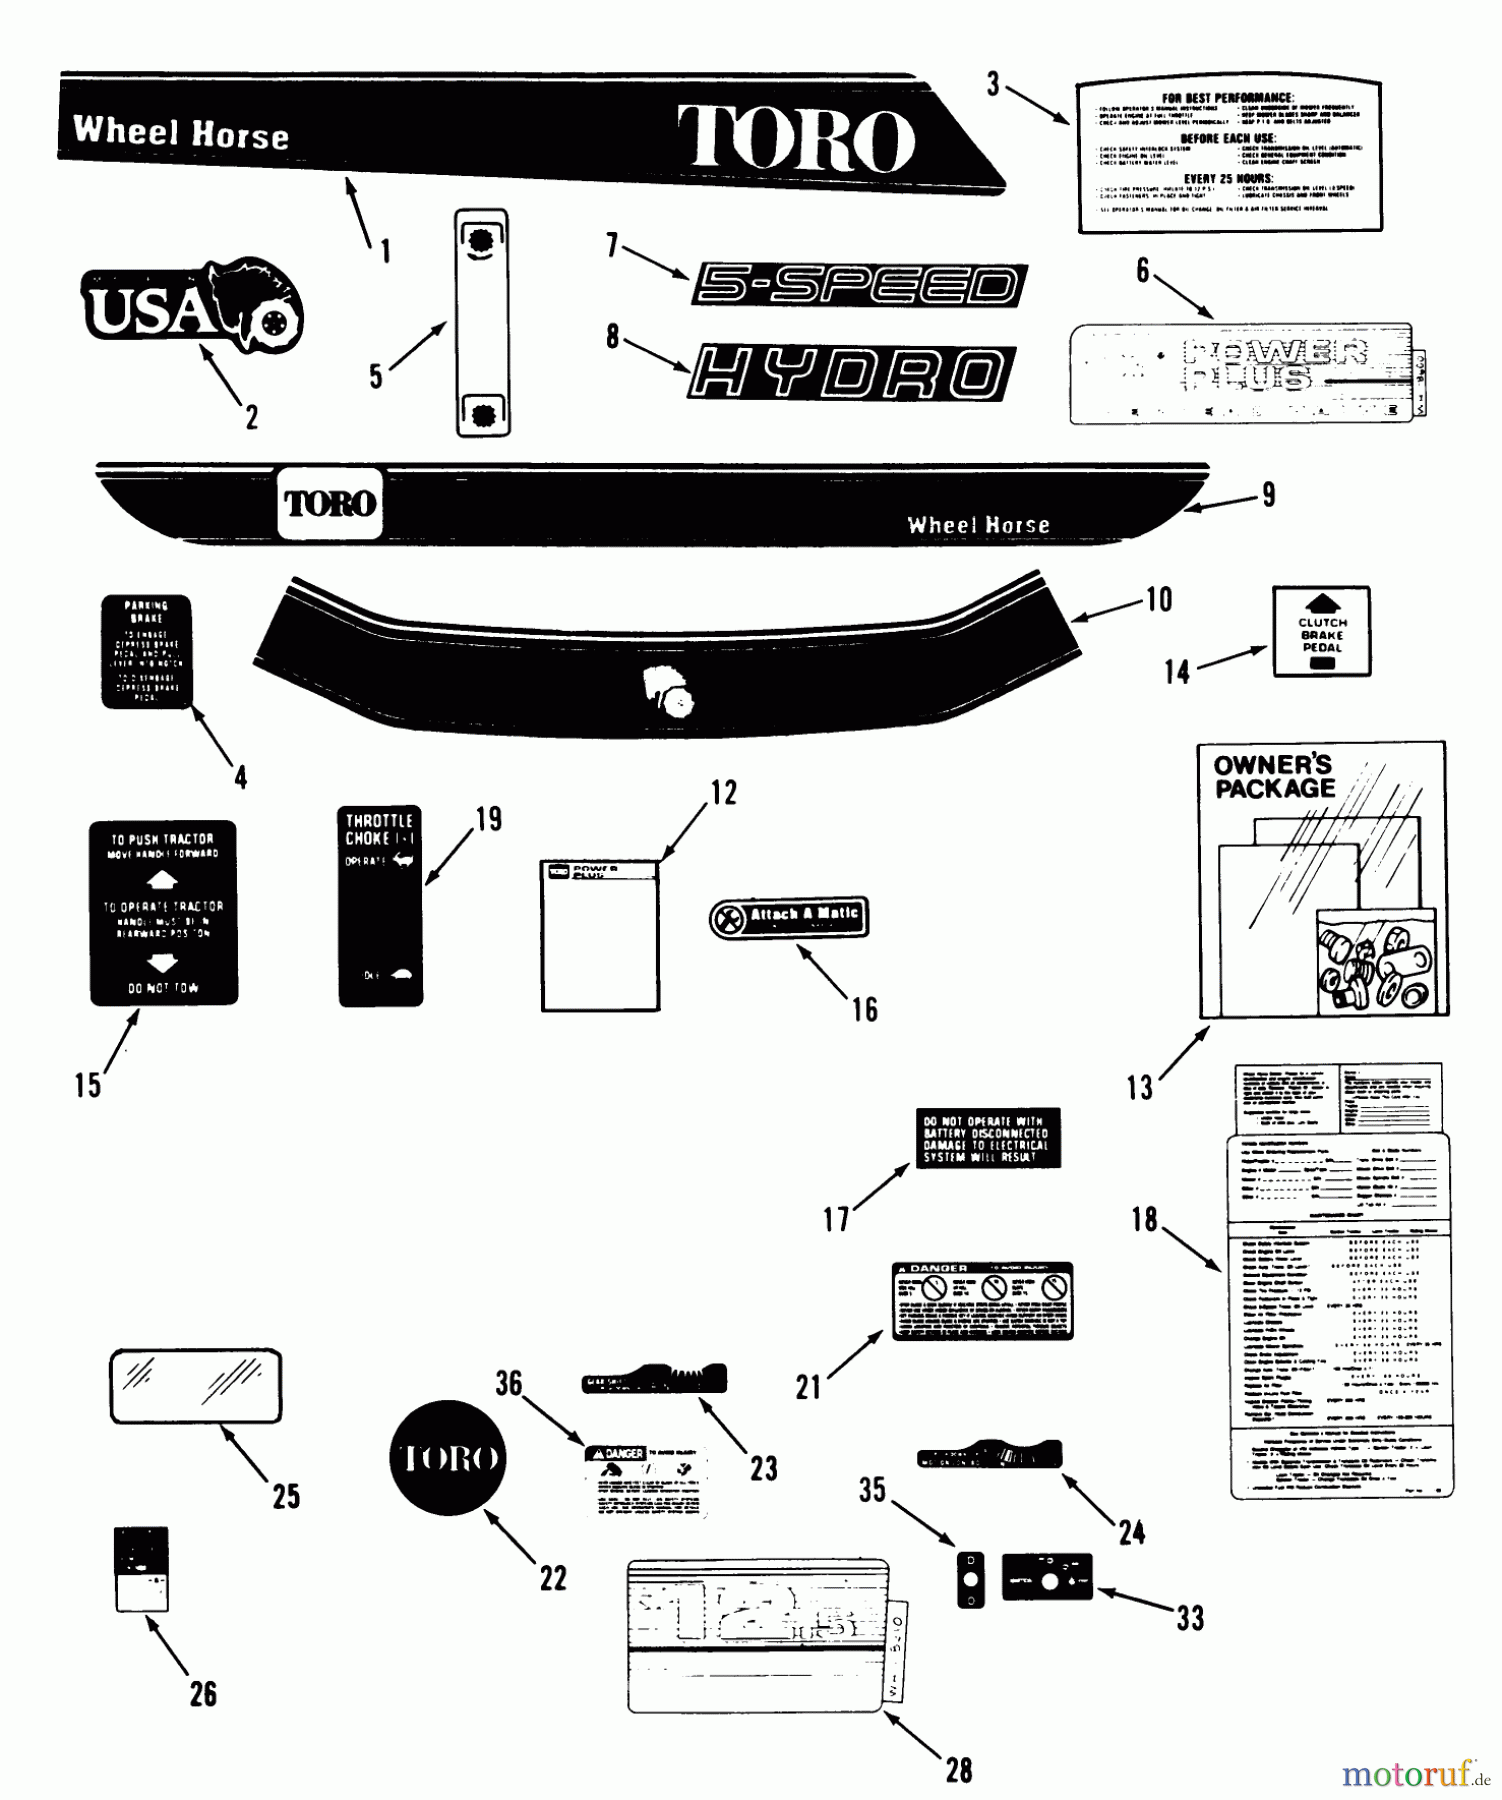  Toro Neu Mowers, Lawn & Garden Tractor Seite 1 32-12O503 (212-5) - Toro 212-5 Tractor, 1992 (2000001-2999999) DECAL & MISCELLANEOUS PARTS ASSEMBLY